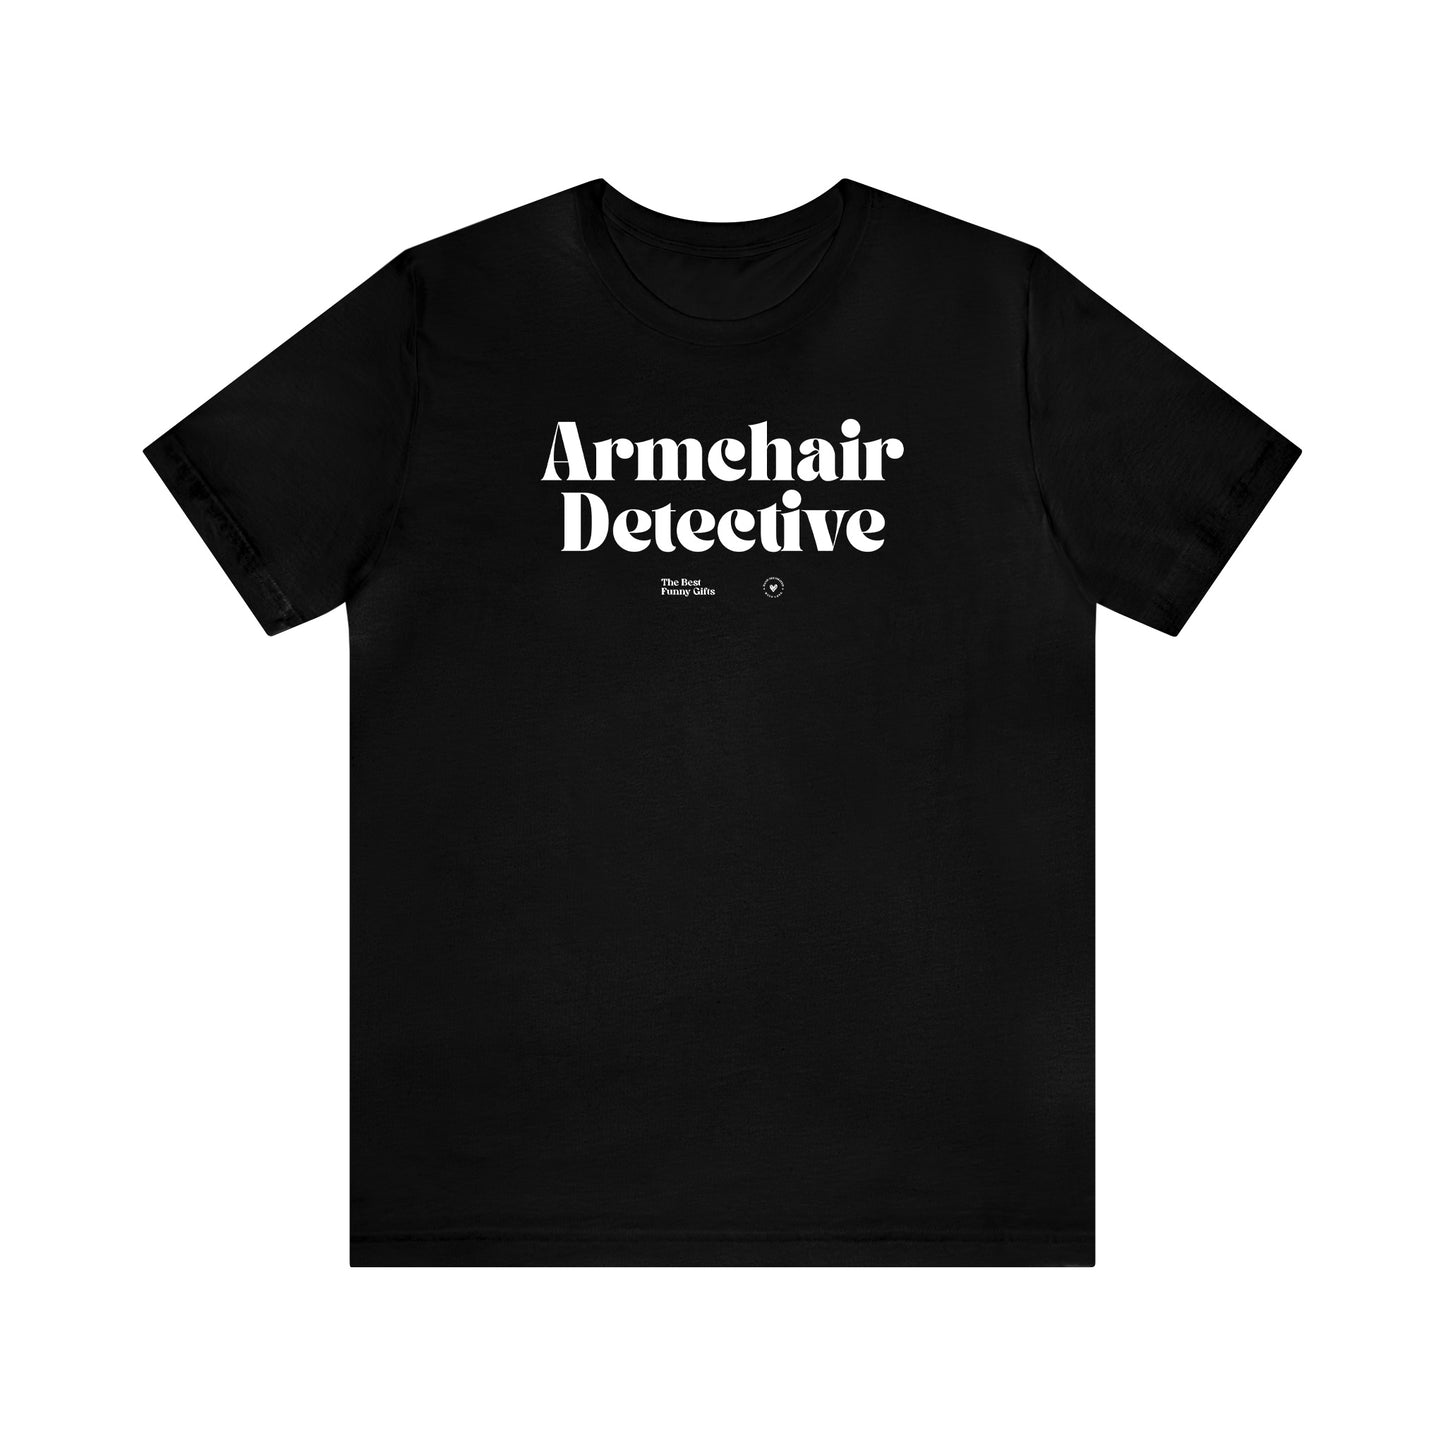 Funny Shirts for Women - Armchair Detective - Women’s T Shirts